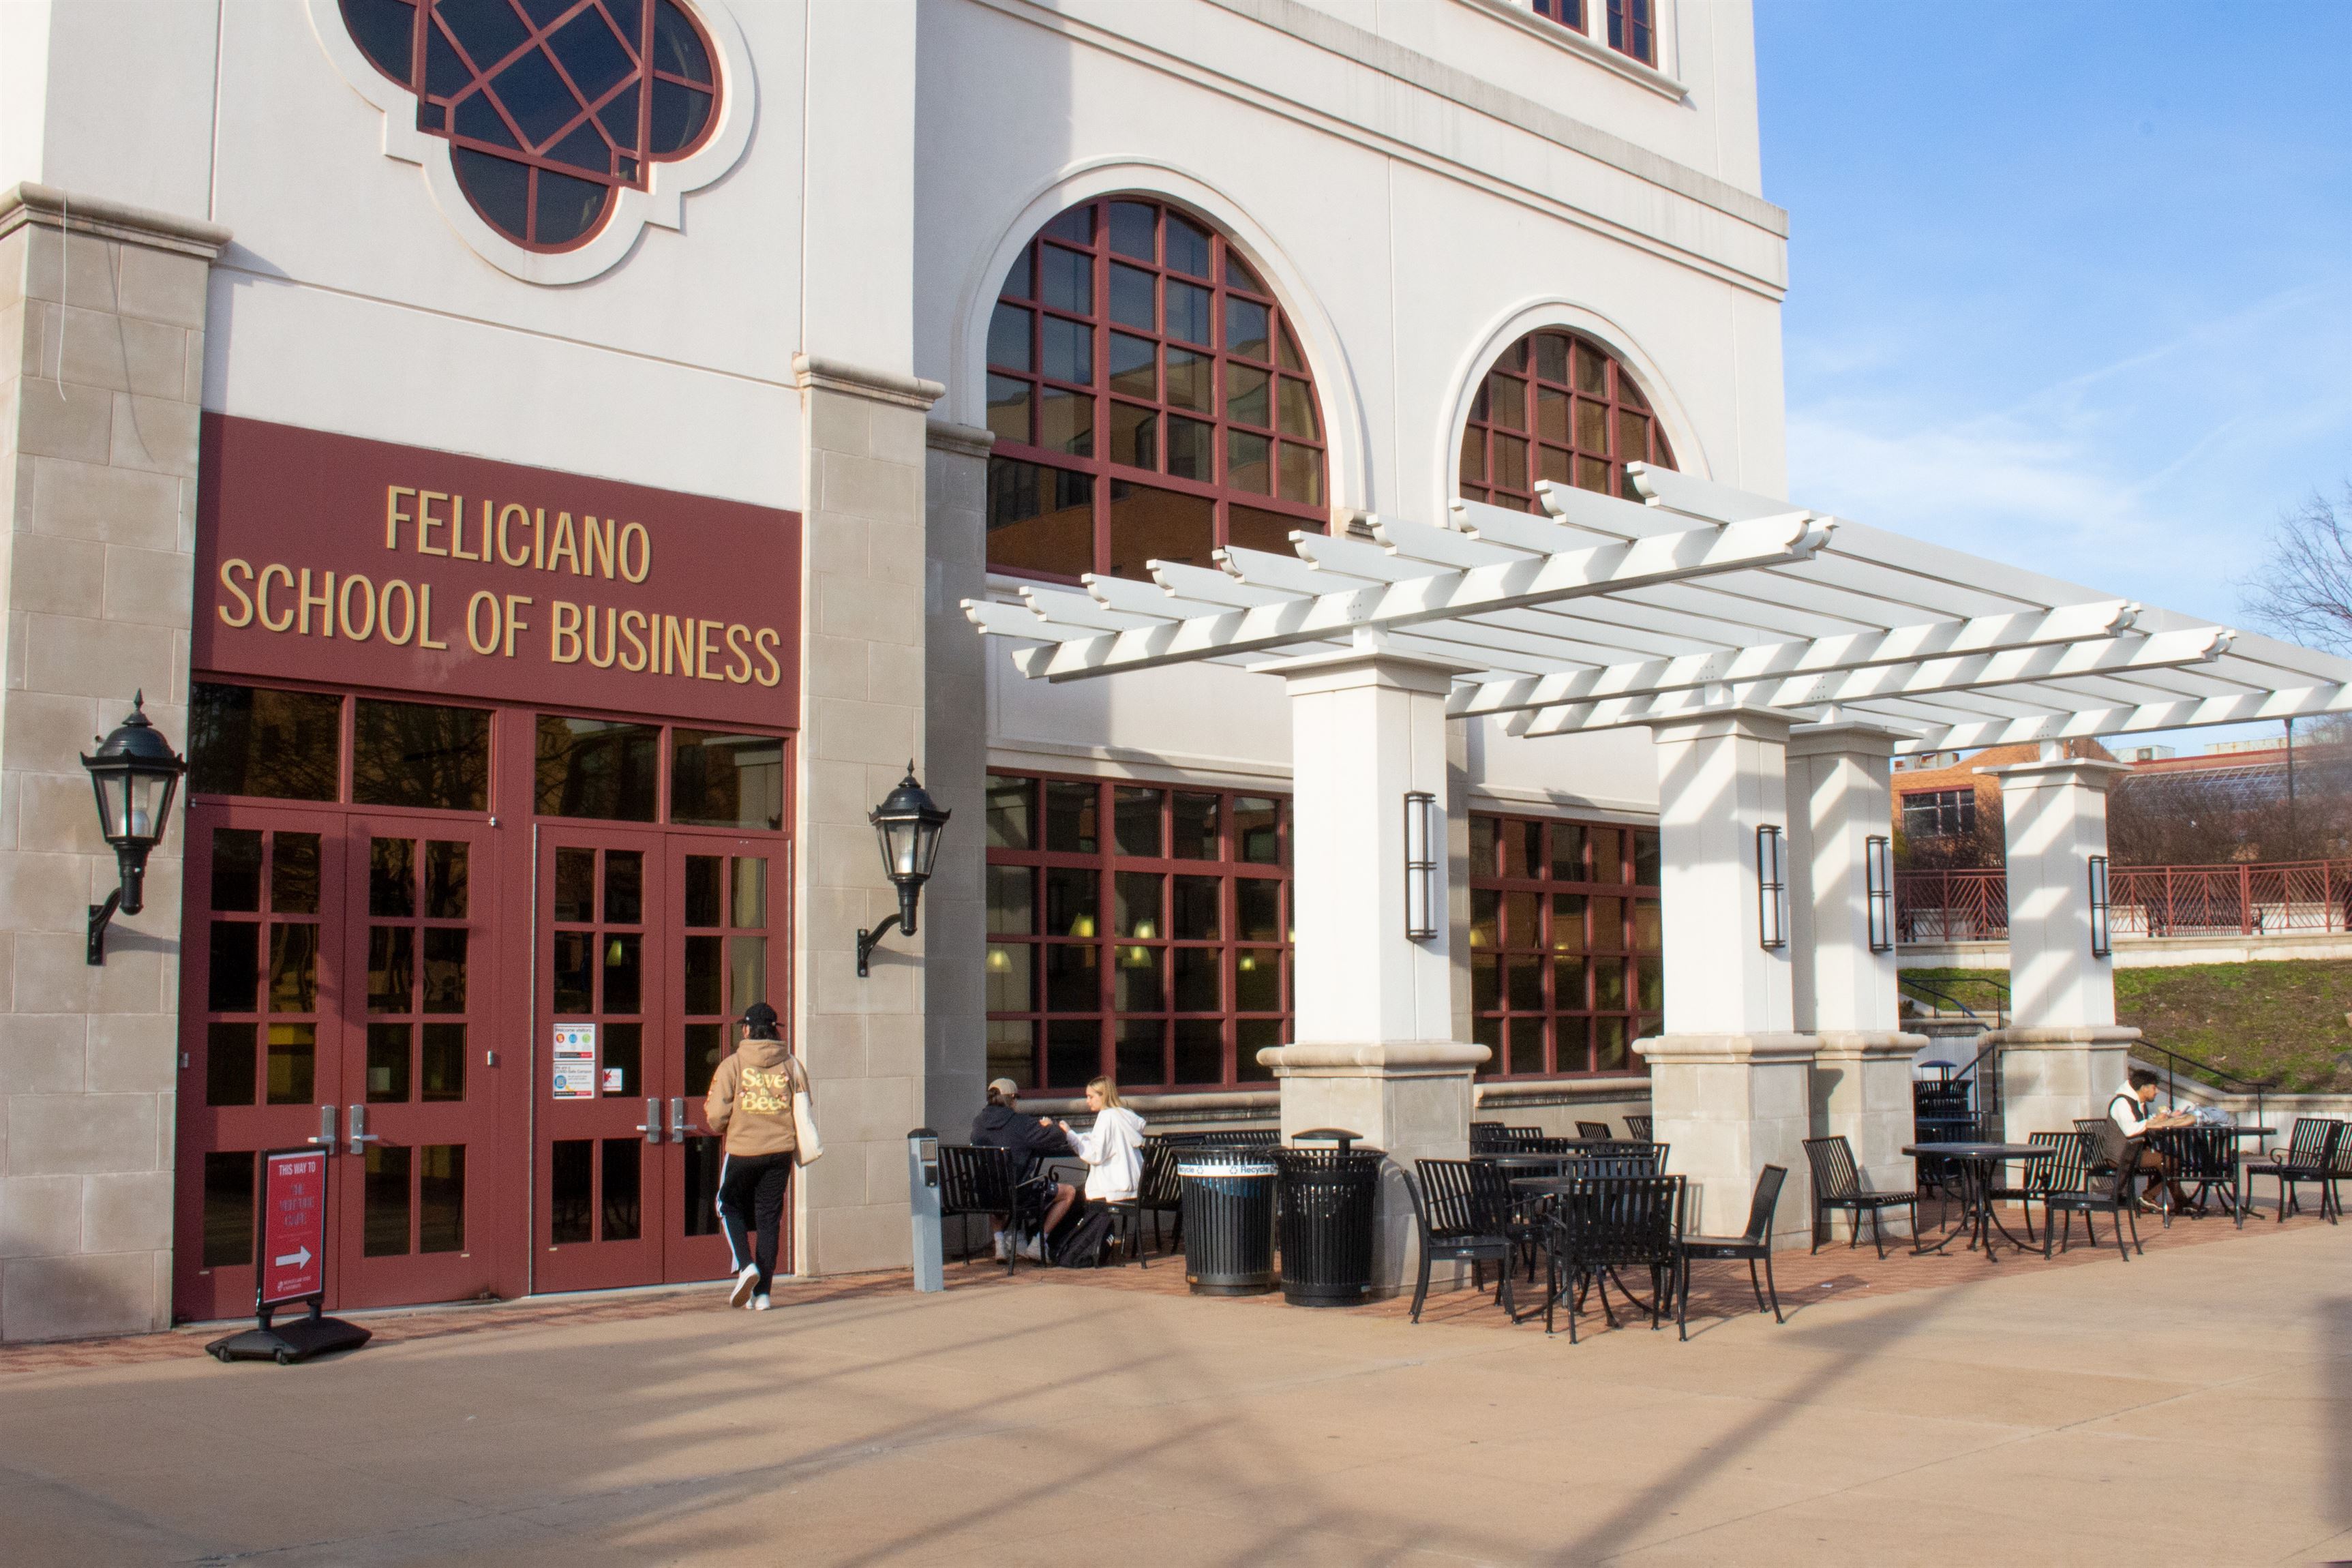 The Venture Cafe has great outdoor seating that students can take advantage of.
Sal DiMaggio | The Montclarion